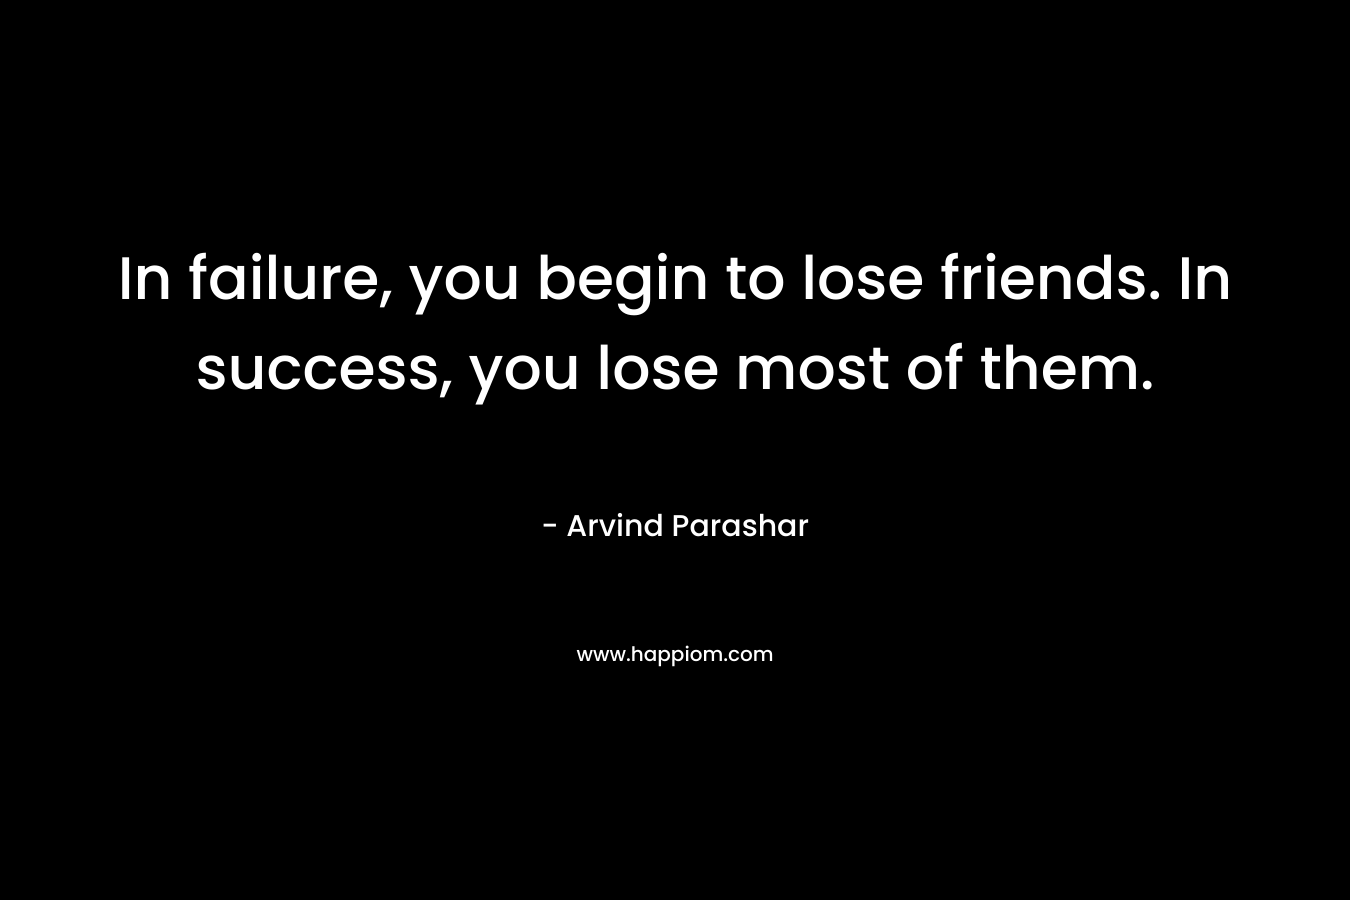 In failure, you begin to lose friends. In success, you lose most of them.